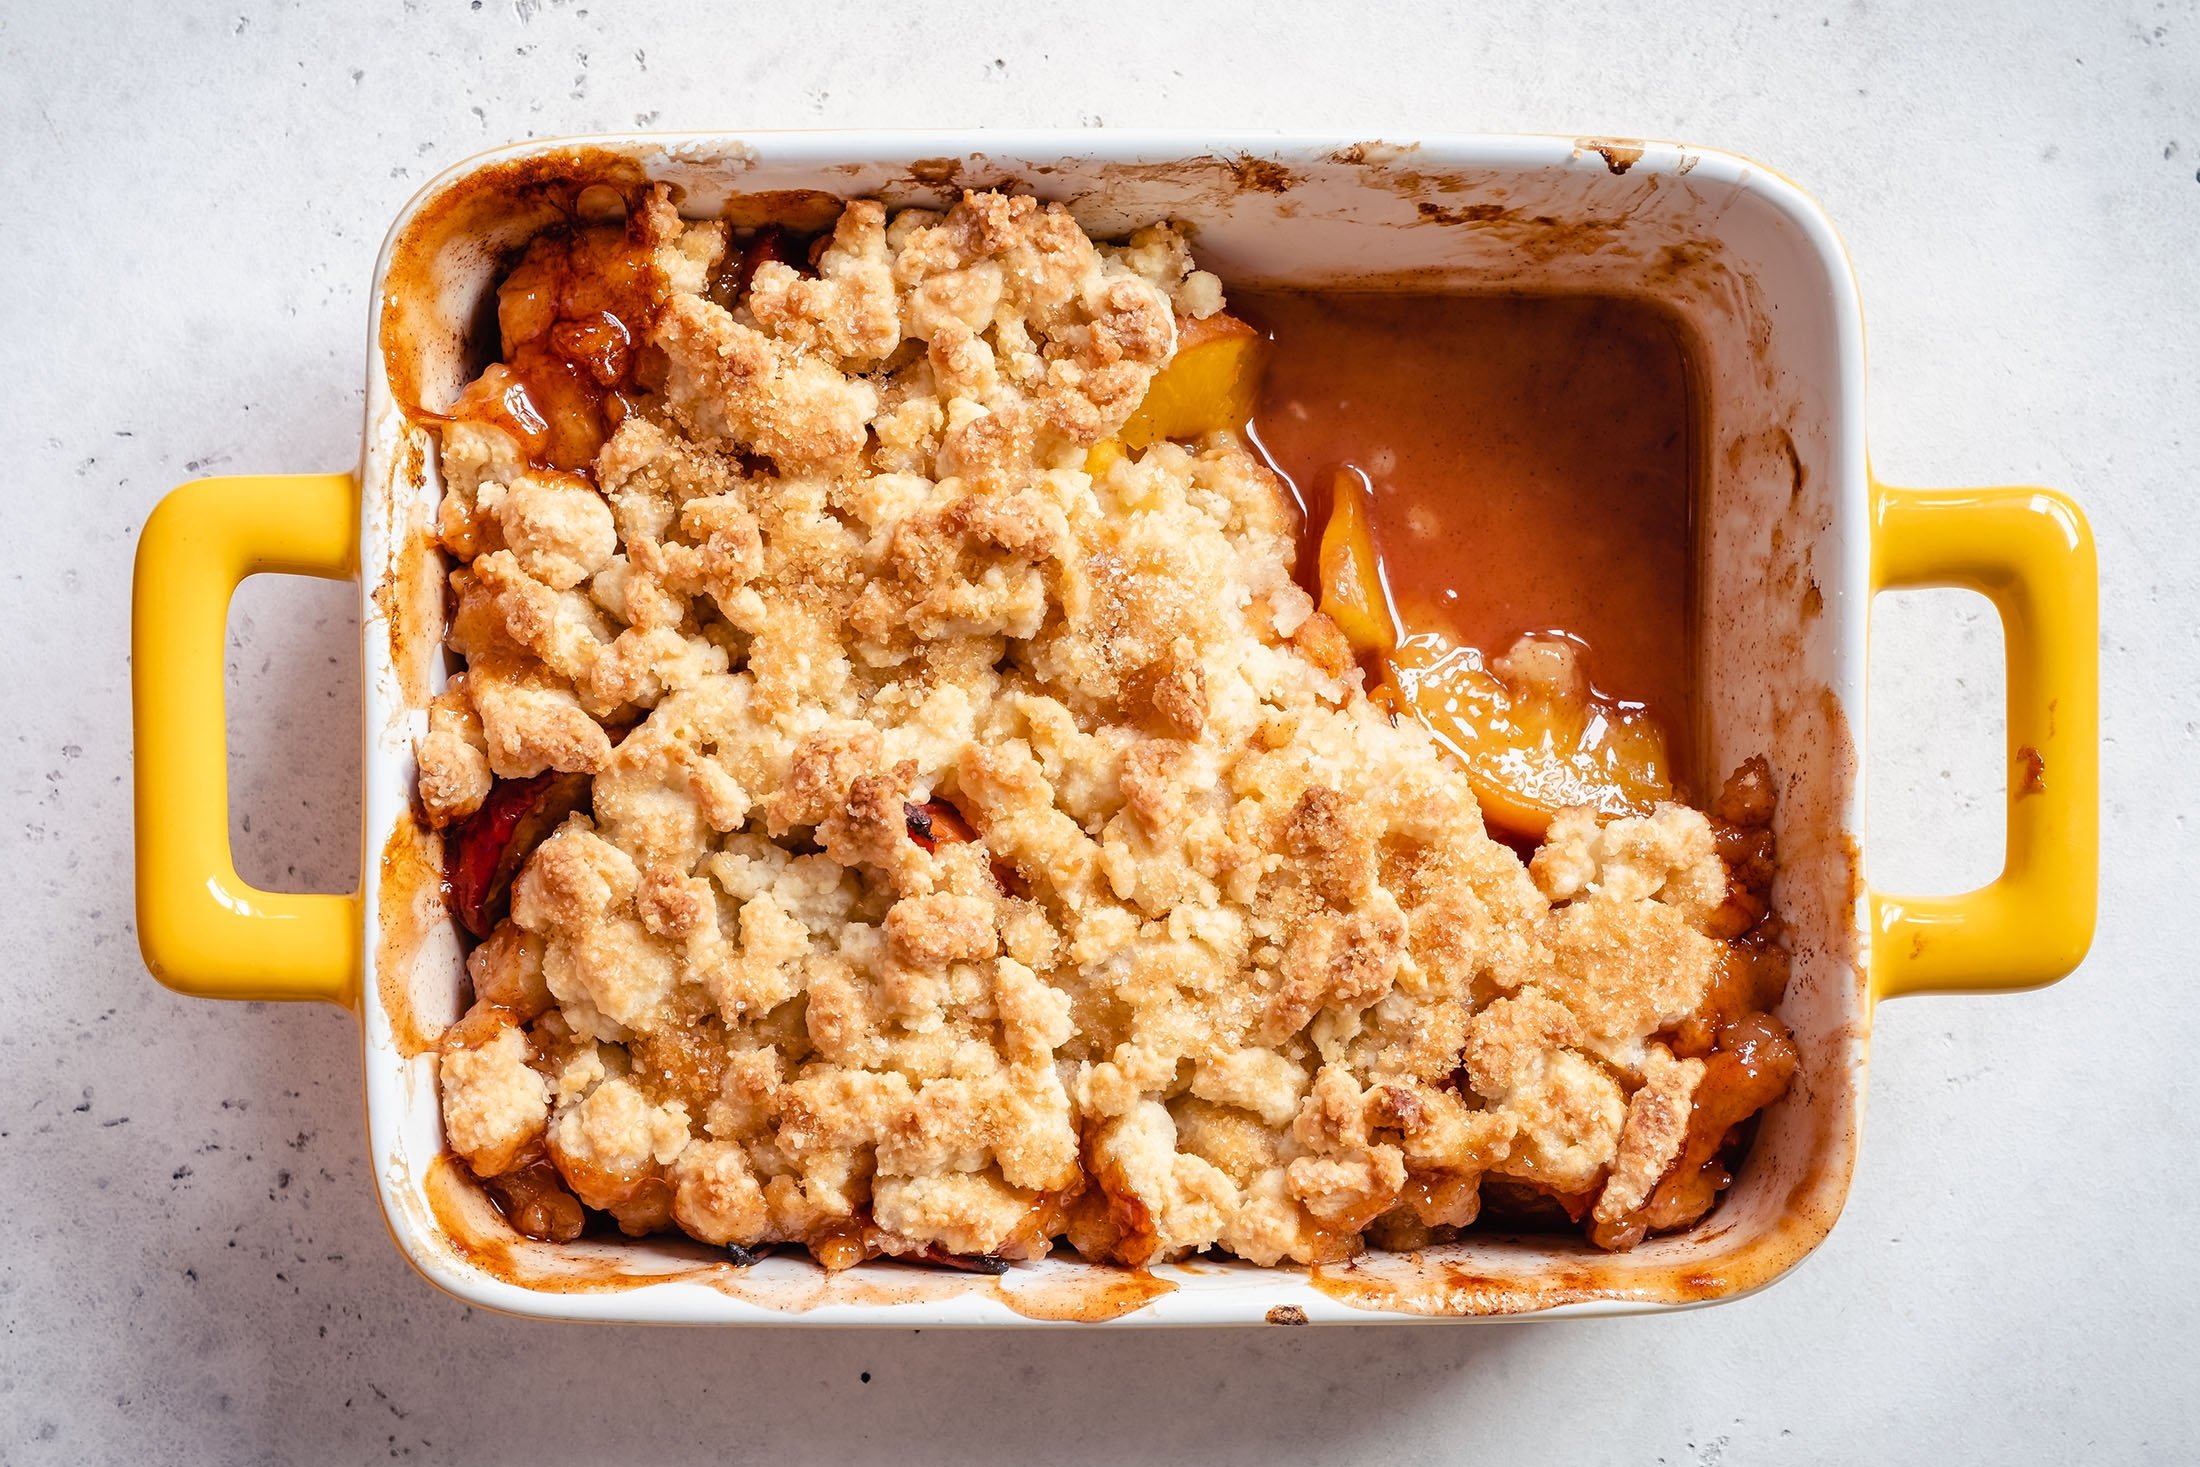 Sugar-free crumble served with a scoop of ice cream makes for a great summer dessert. (Shutterstock Photo)